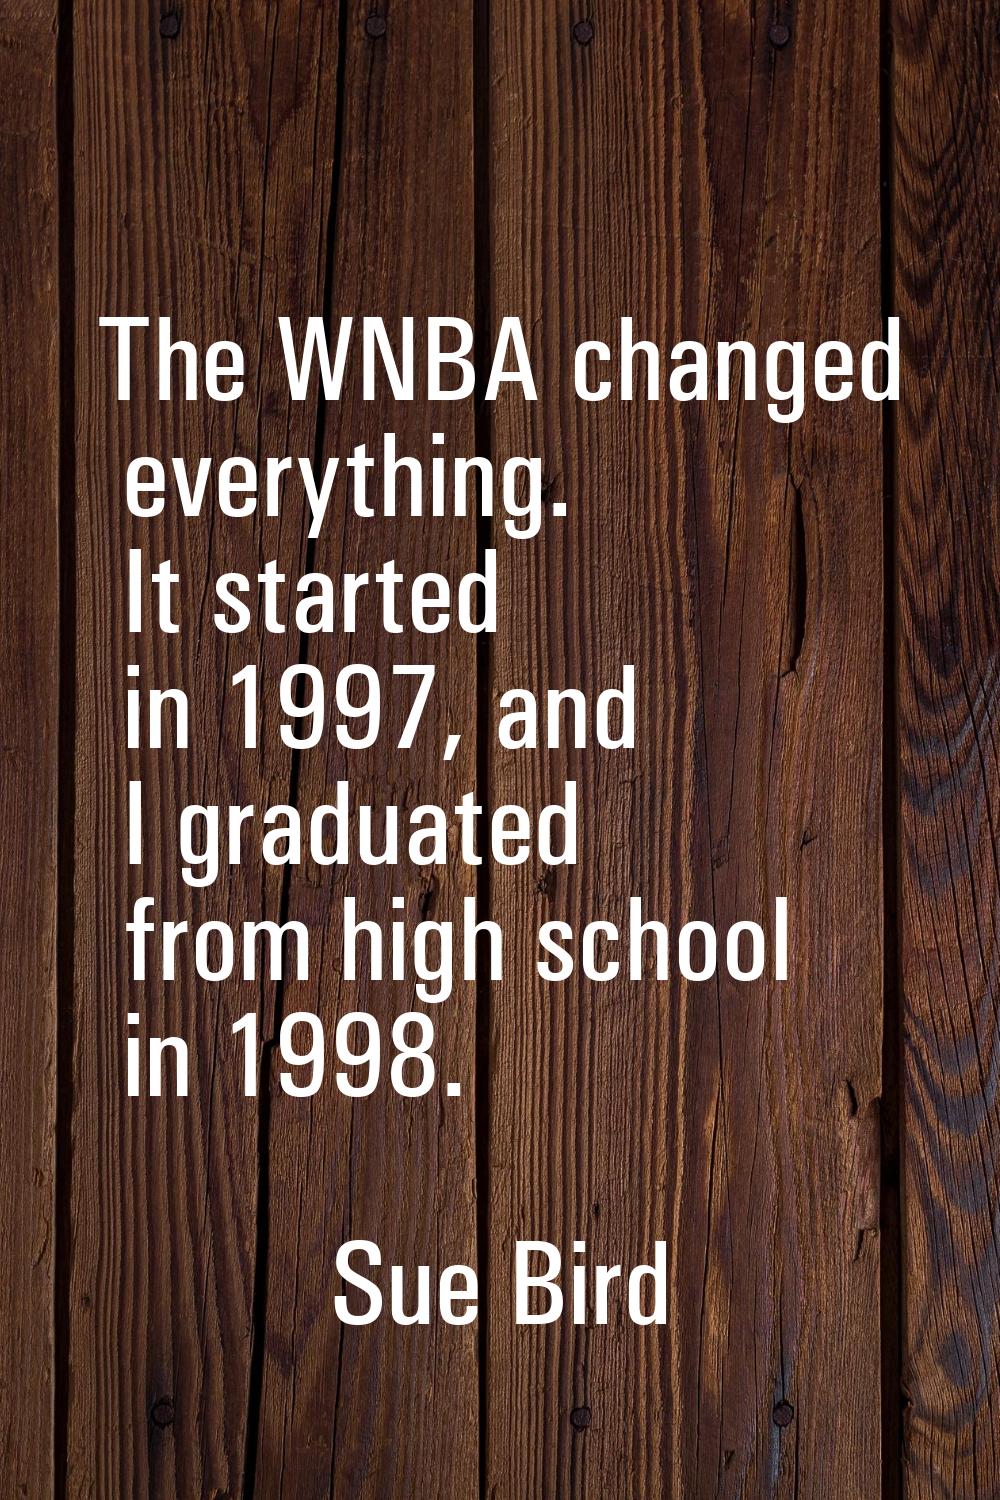 The WNBA changed everything. It started in 1997, and I graduated from high school in 1998.